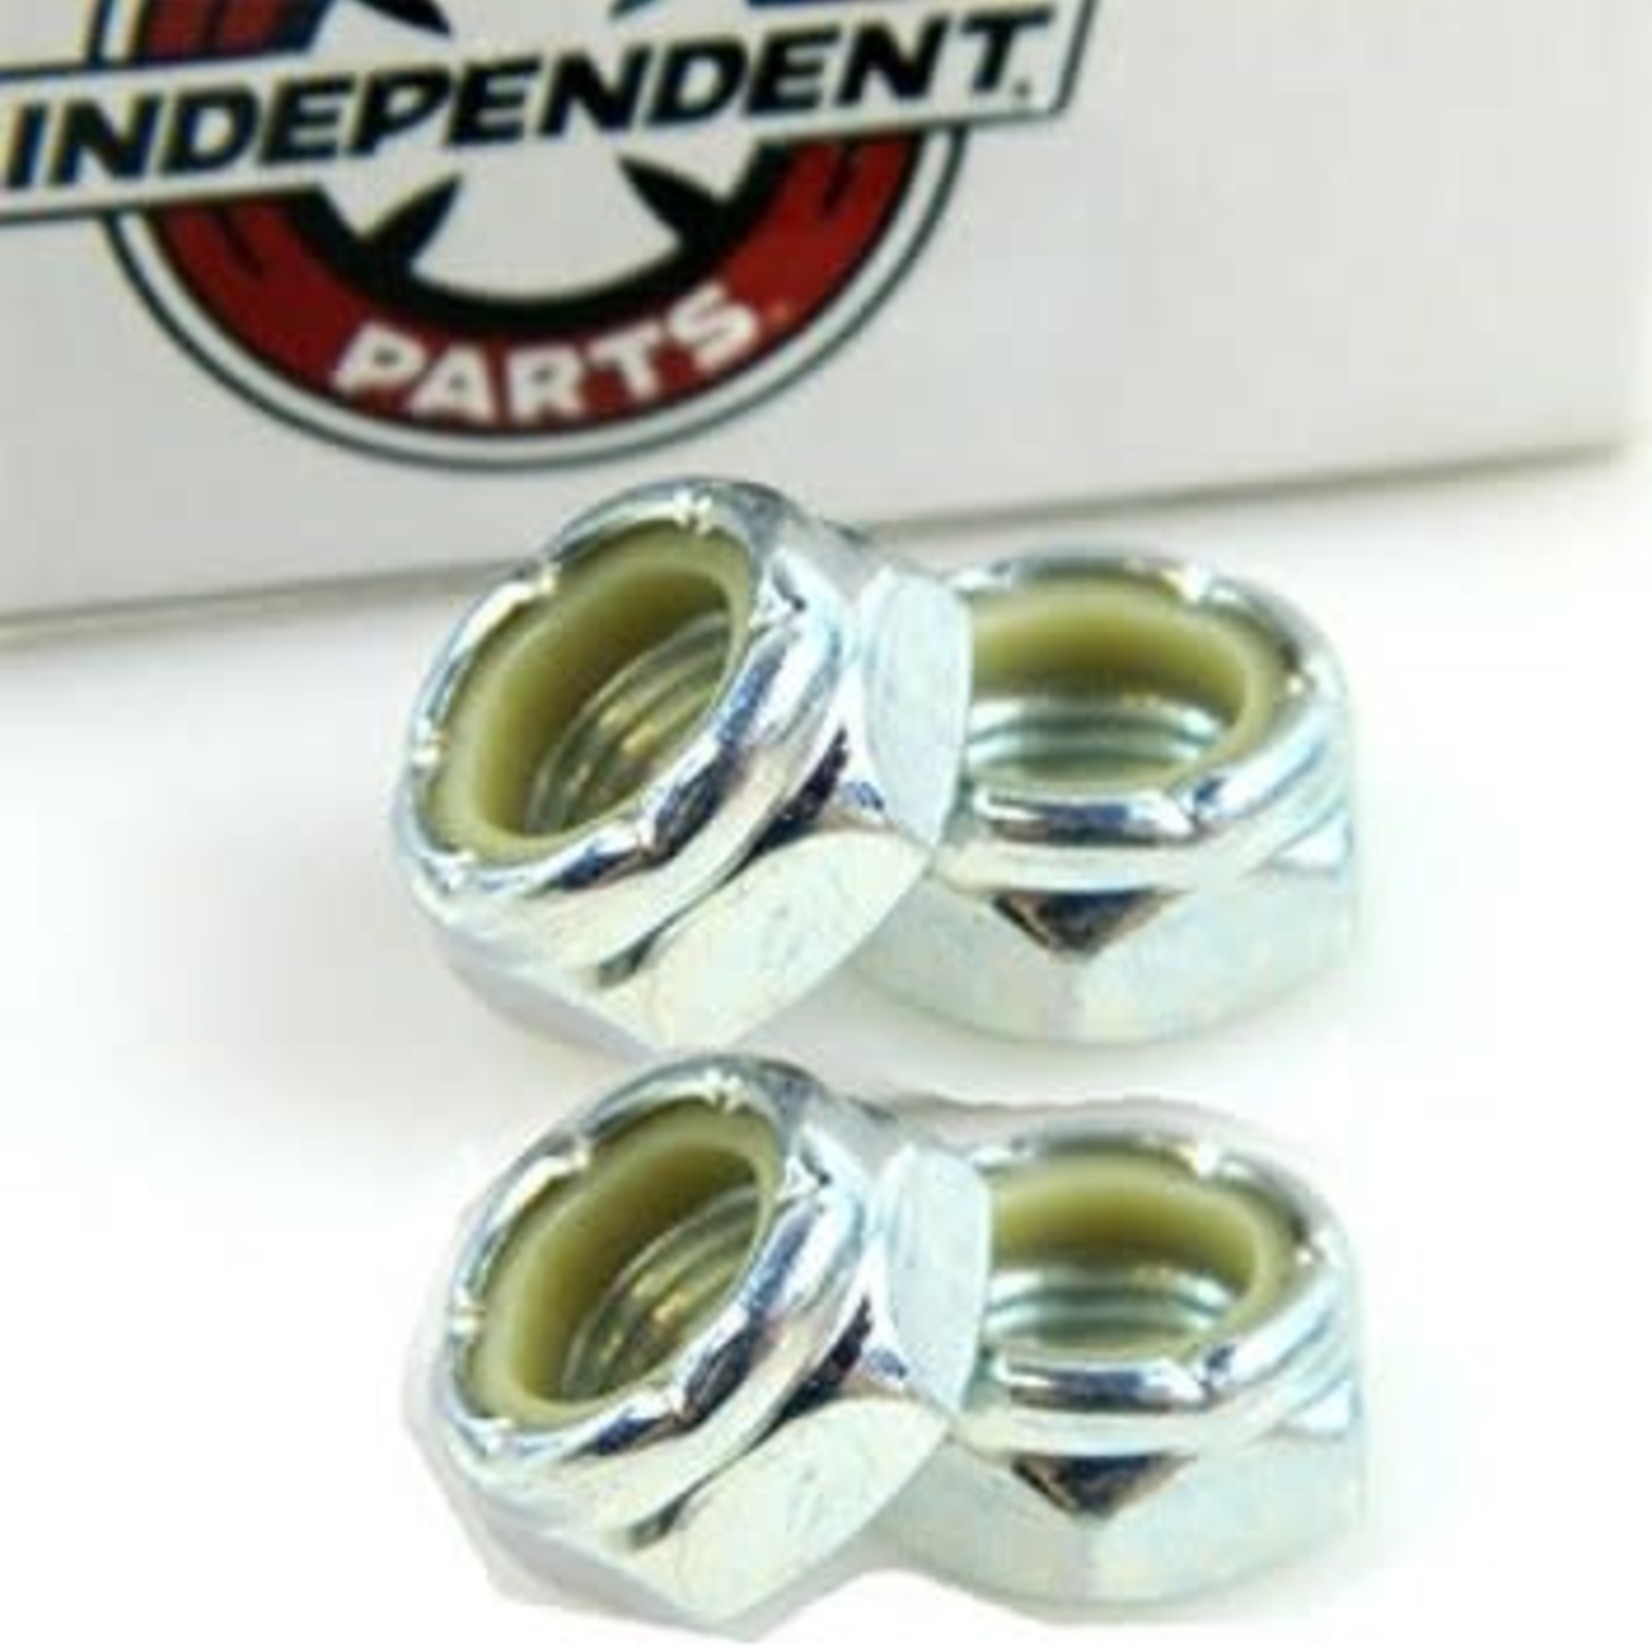 Independent Independent Axle Nuts (1 Nut)